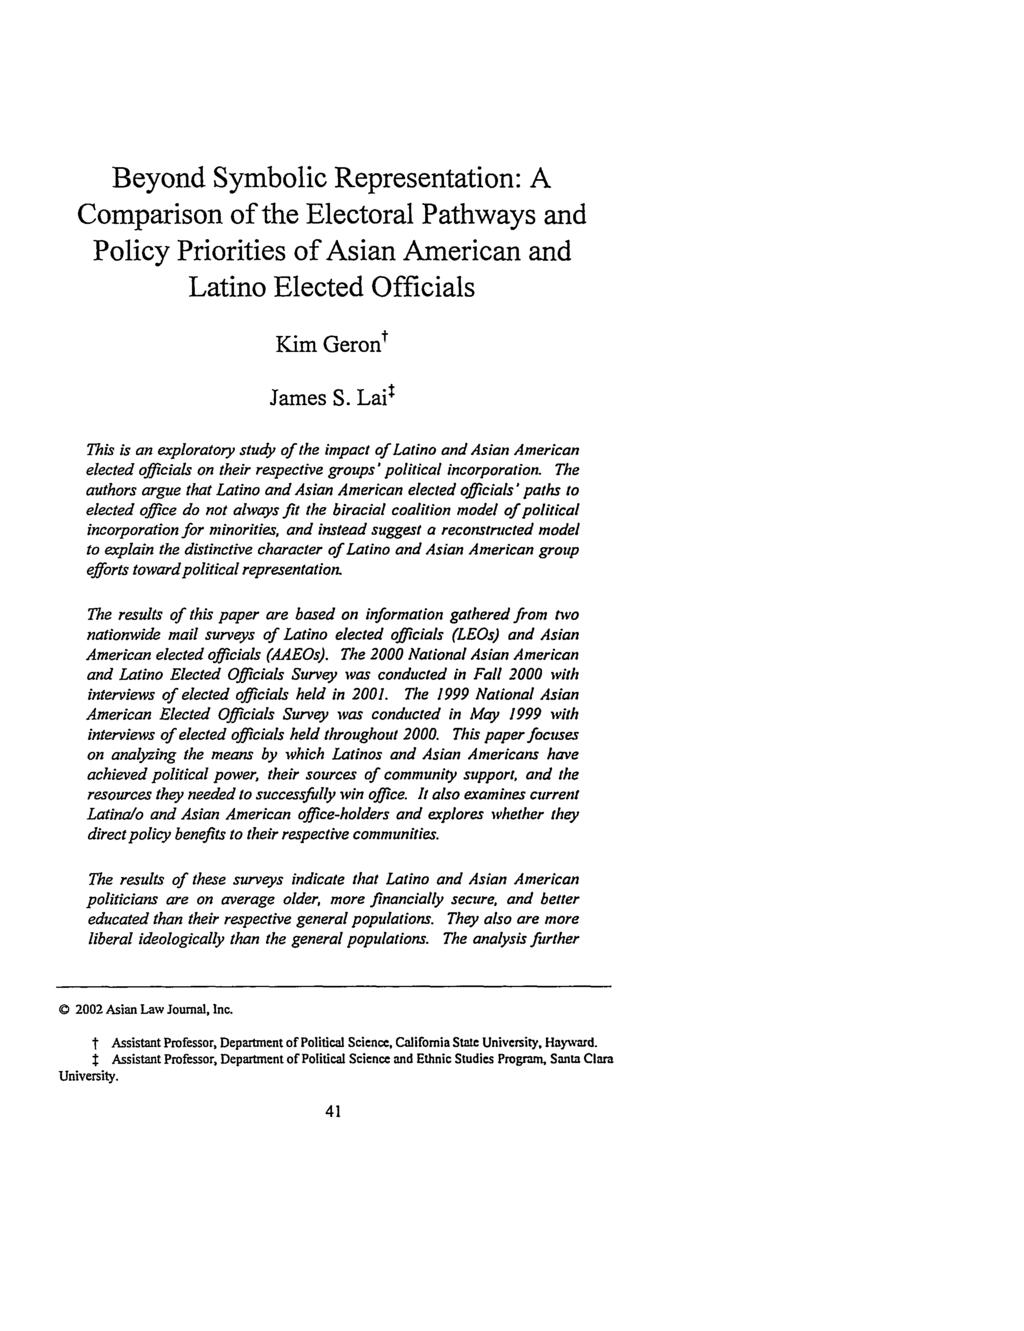 Beyond Symbolic Representation: A Comparison of the Electoral Pathways and Policy Priorities of Asian American and Latino Elected Officials Kim Geront James S.